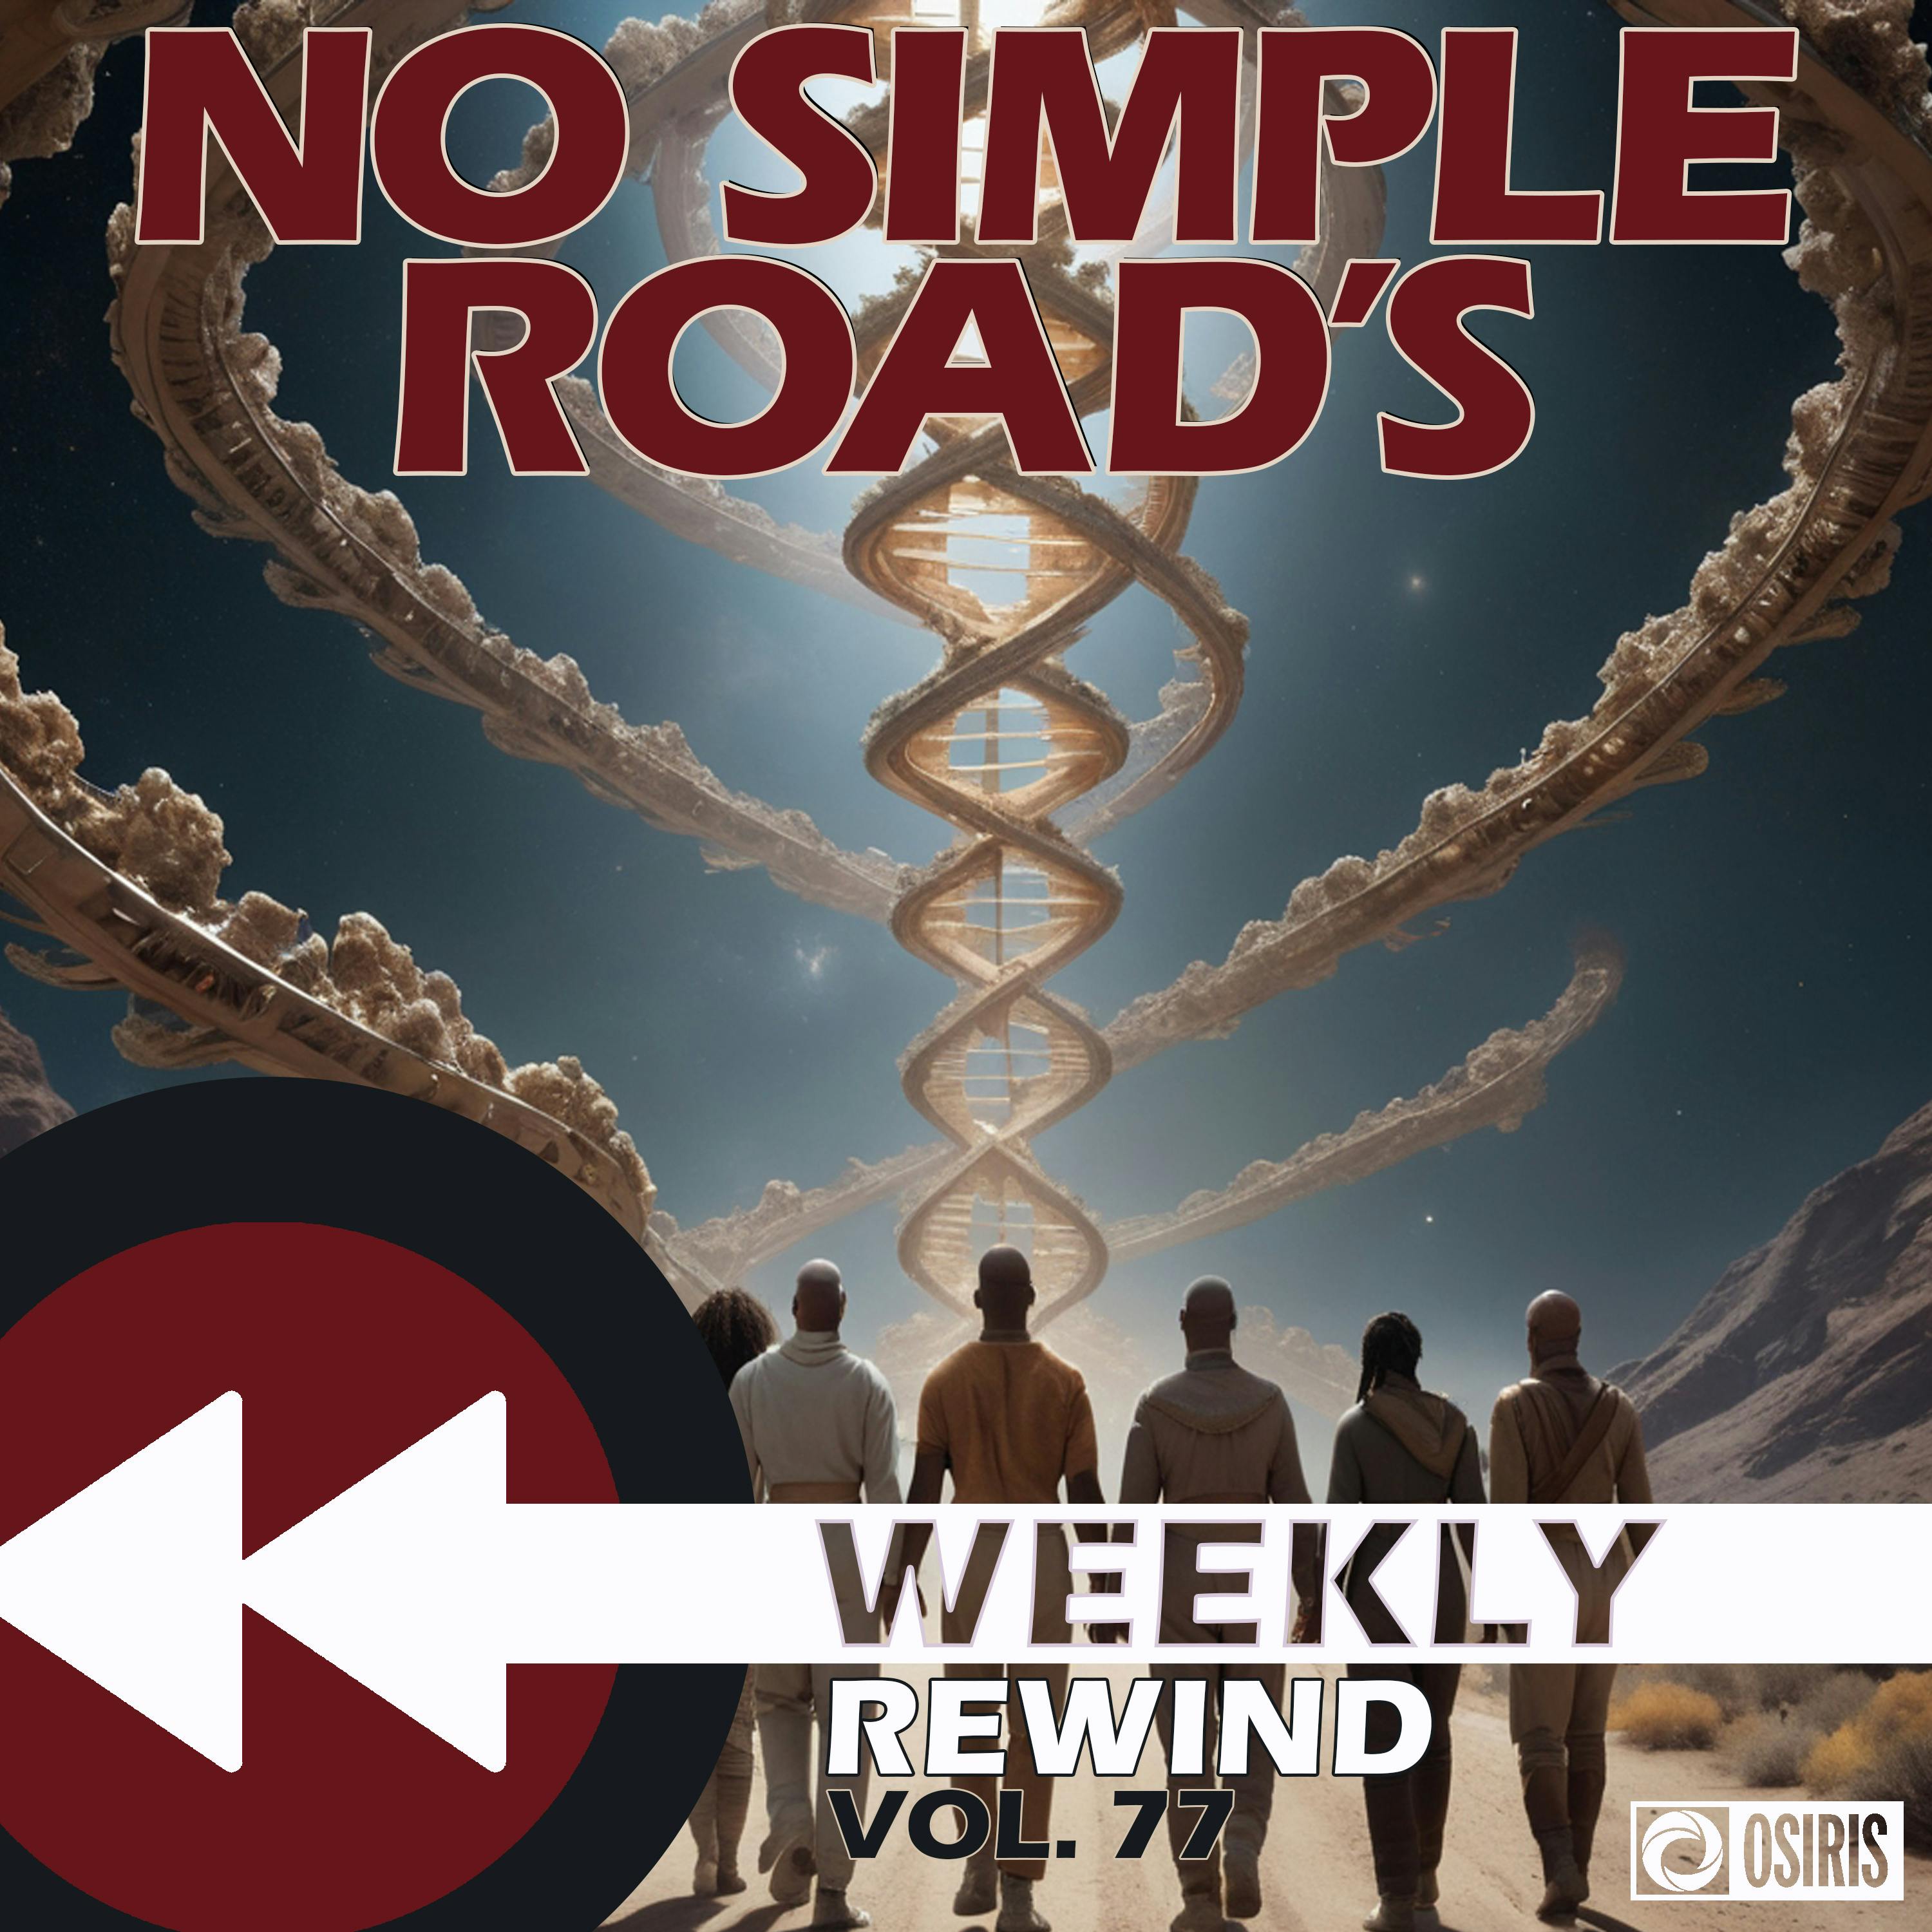 No Simple Road's Weekly Rewind - Vol. 77: Reflecting on Time and Legacy